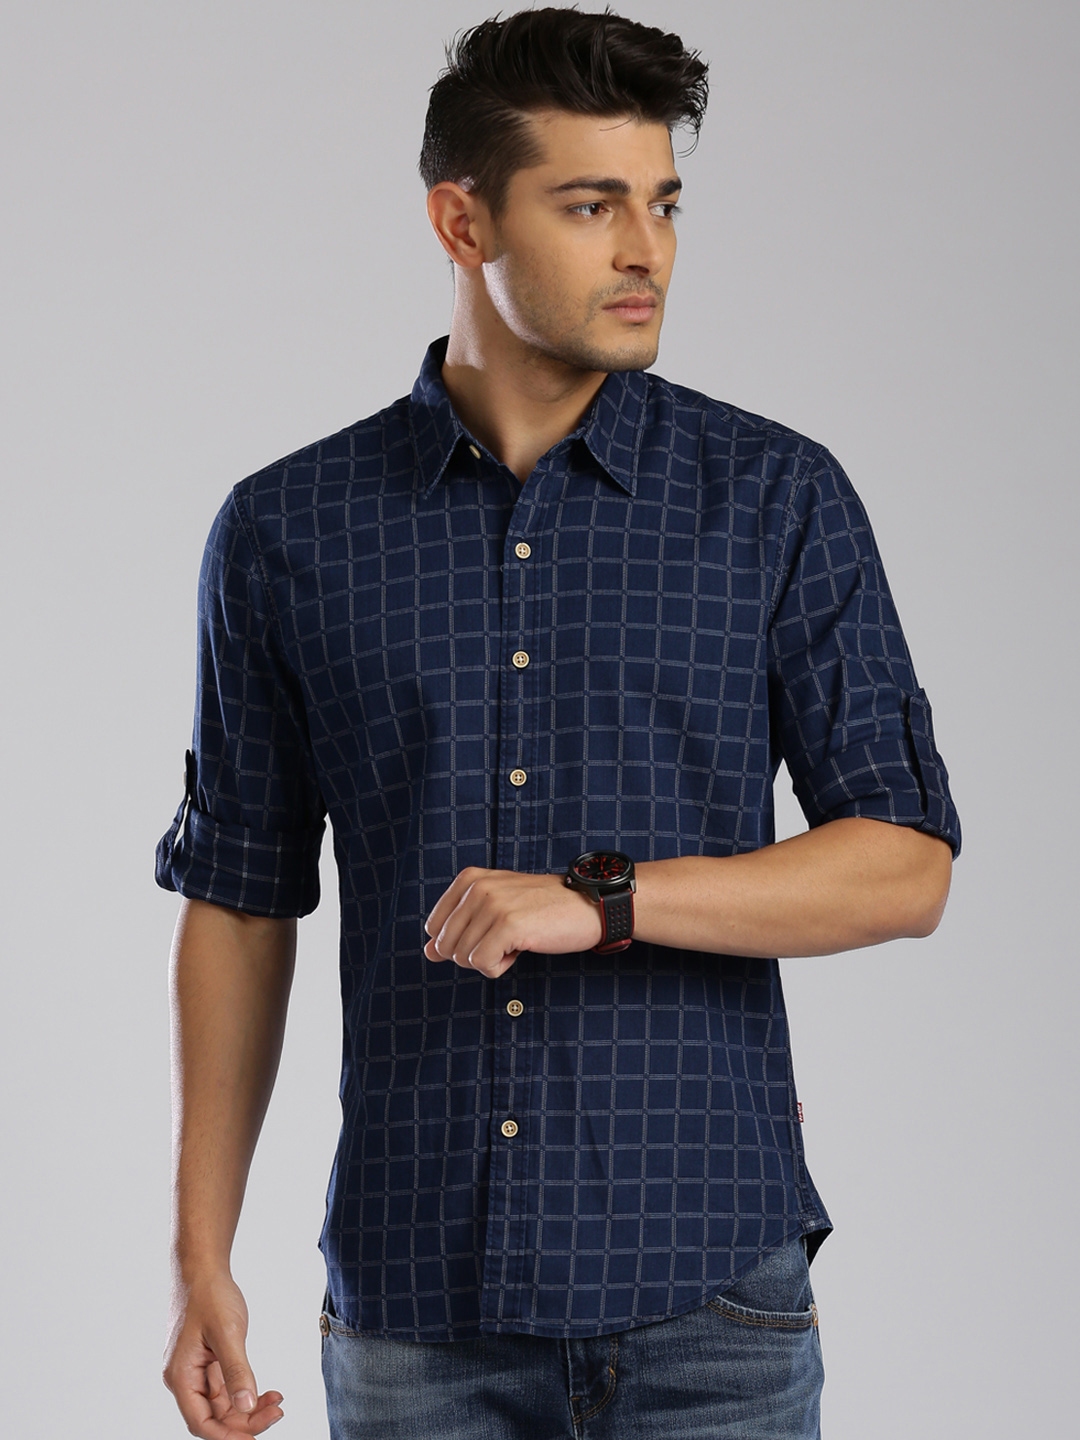 Buy Levi's Navy Checked Slim Fit Casual Shirt - Shirts for Men 1424108 ...